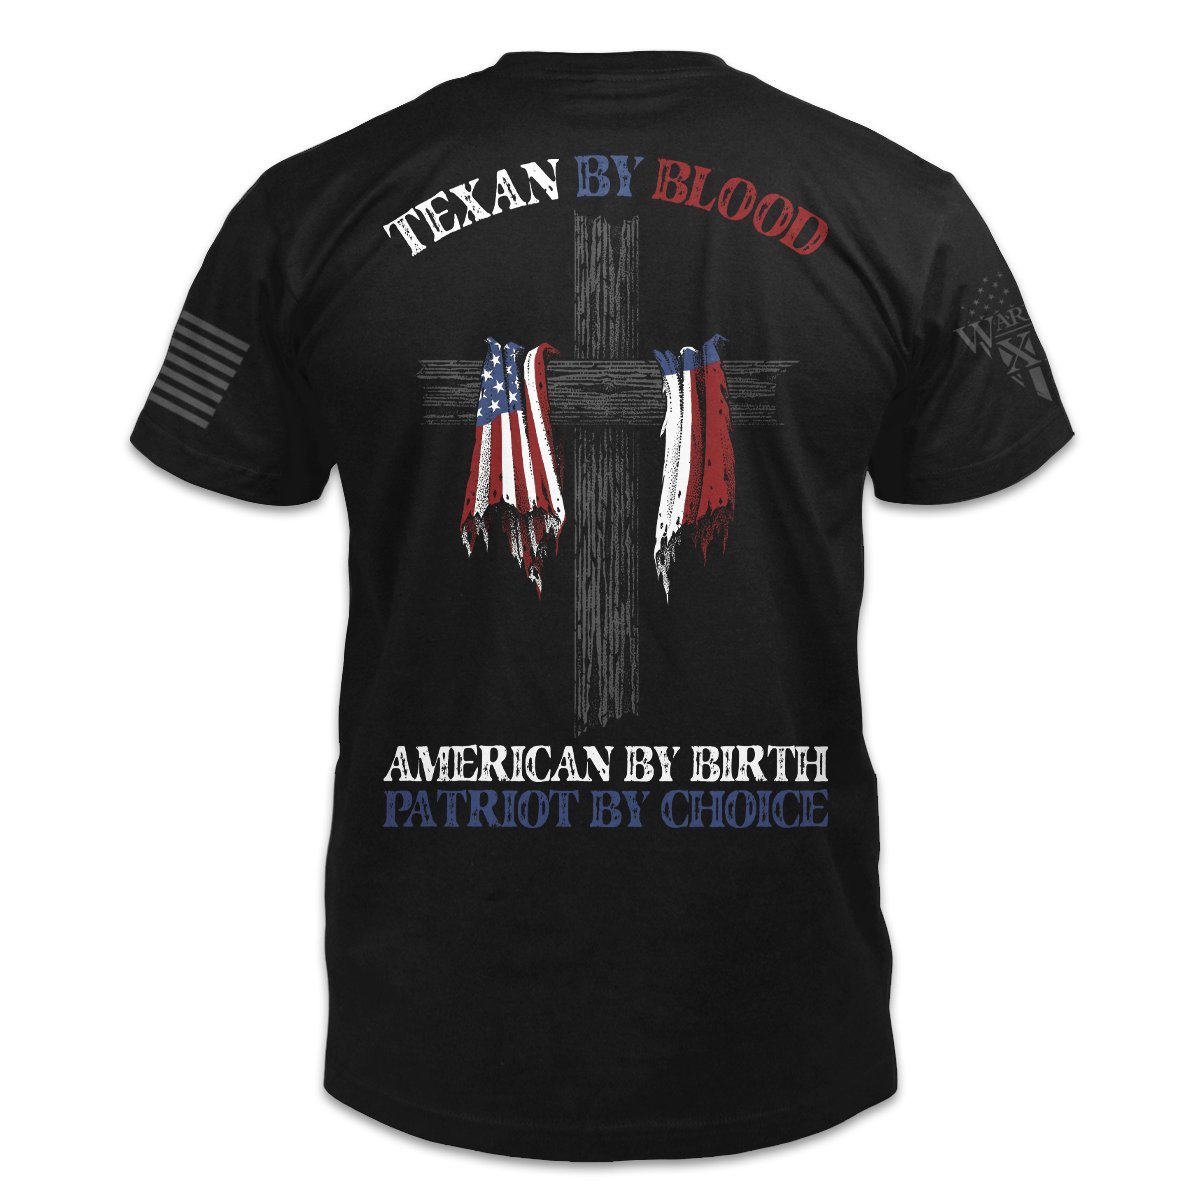 Texan by blood american by birth patriot by choice shirt 1